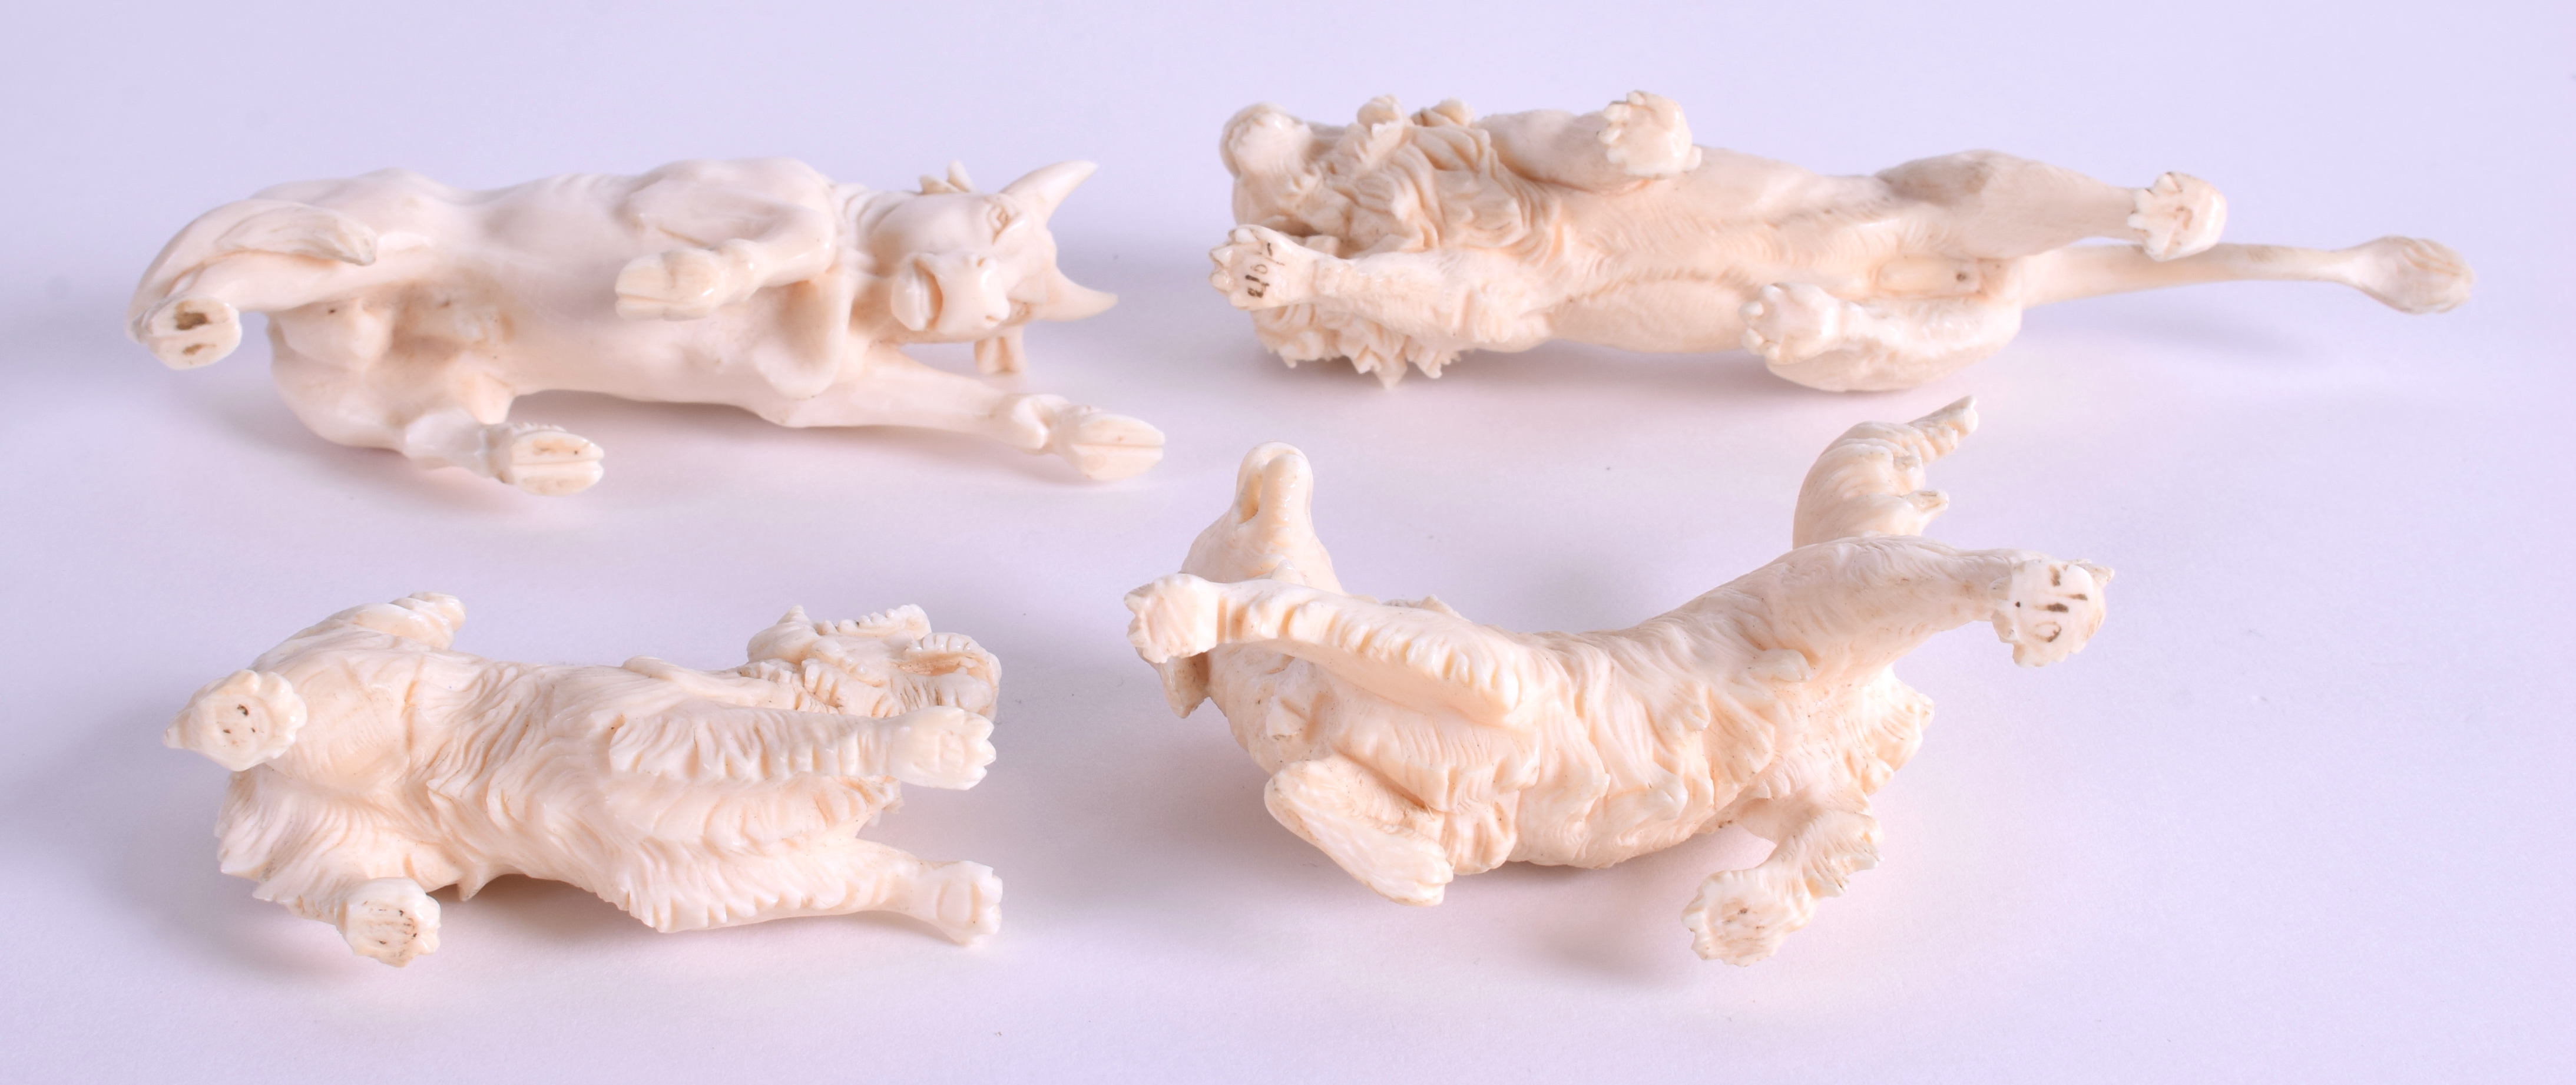 A RARE SET OF FOUR 19TH CENTURY EUROPEAN CARVED IVORY ANIMALS in various forms. Largest 12 cm wide. - Image 3 of 3